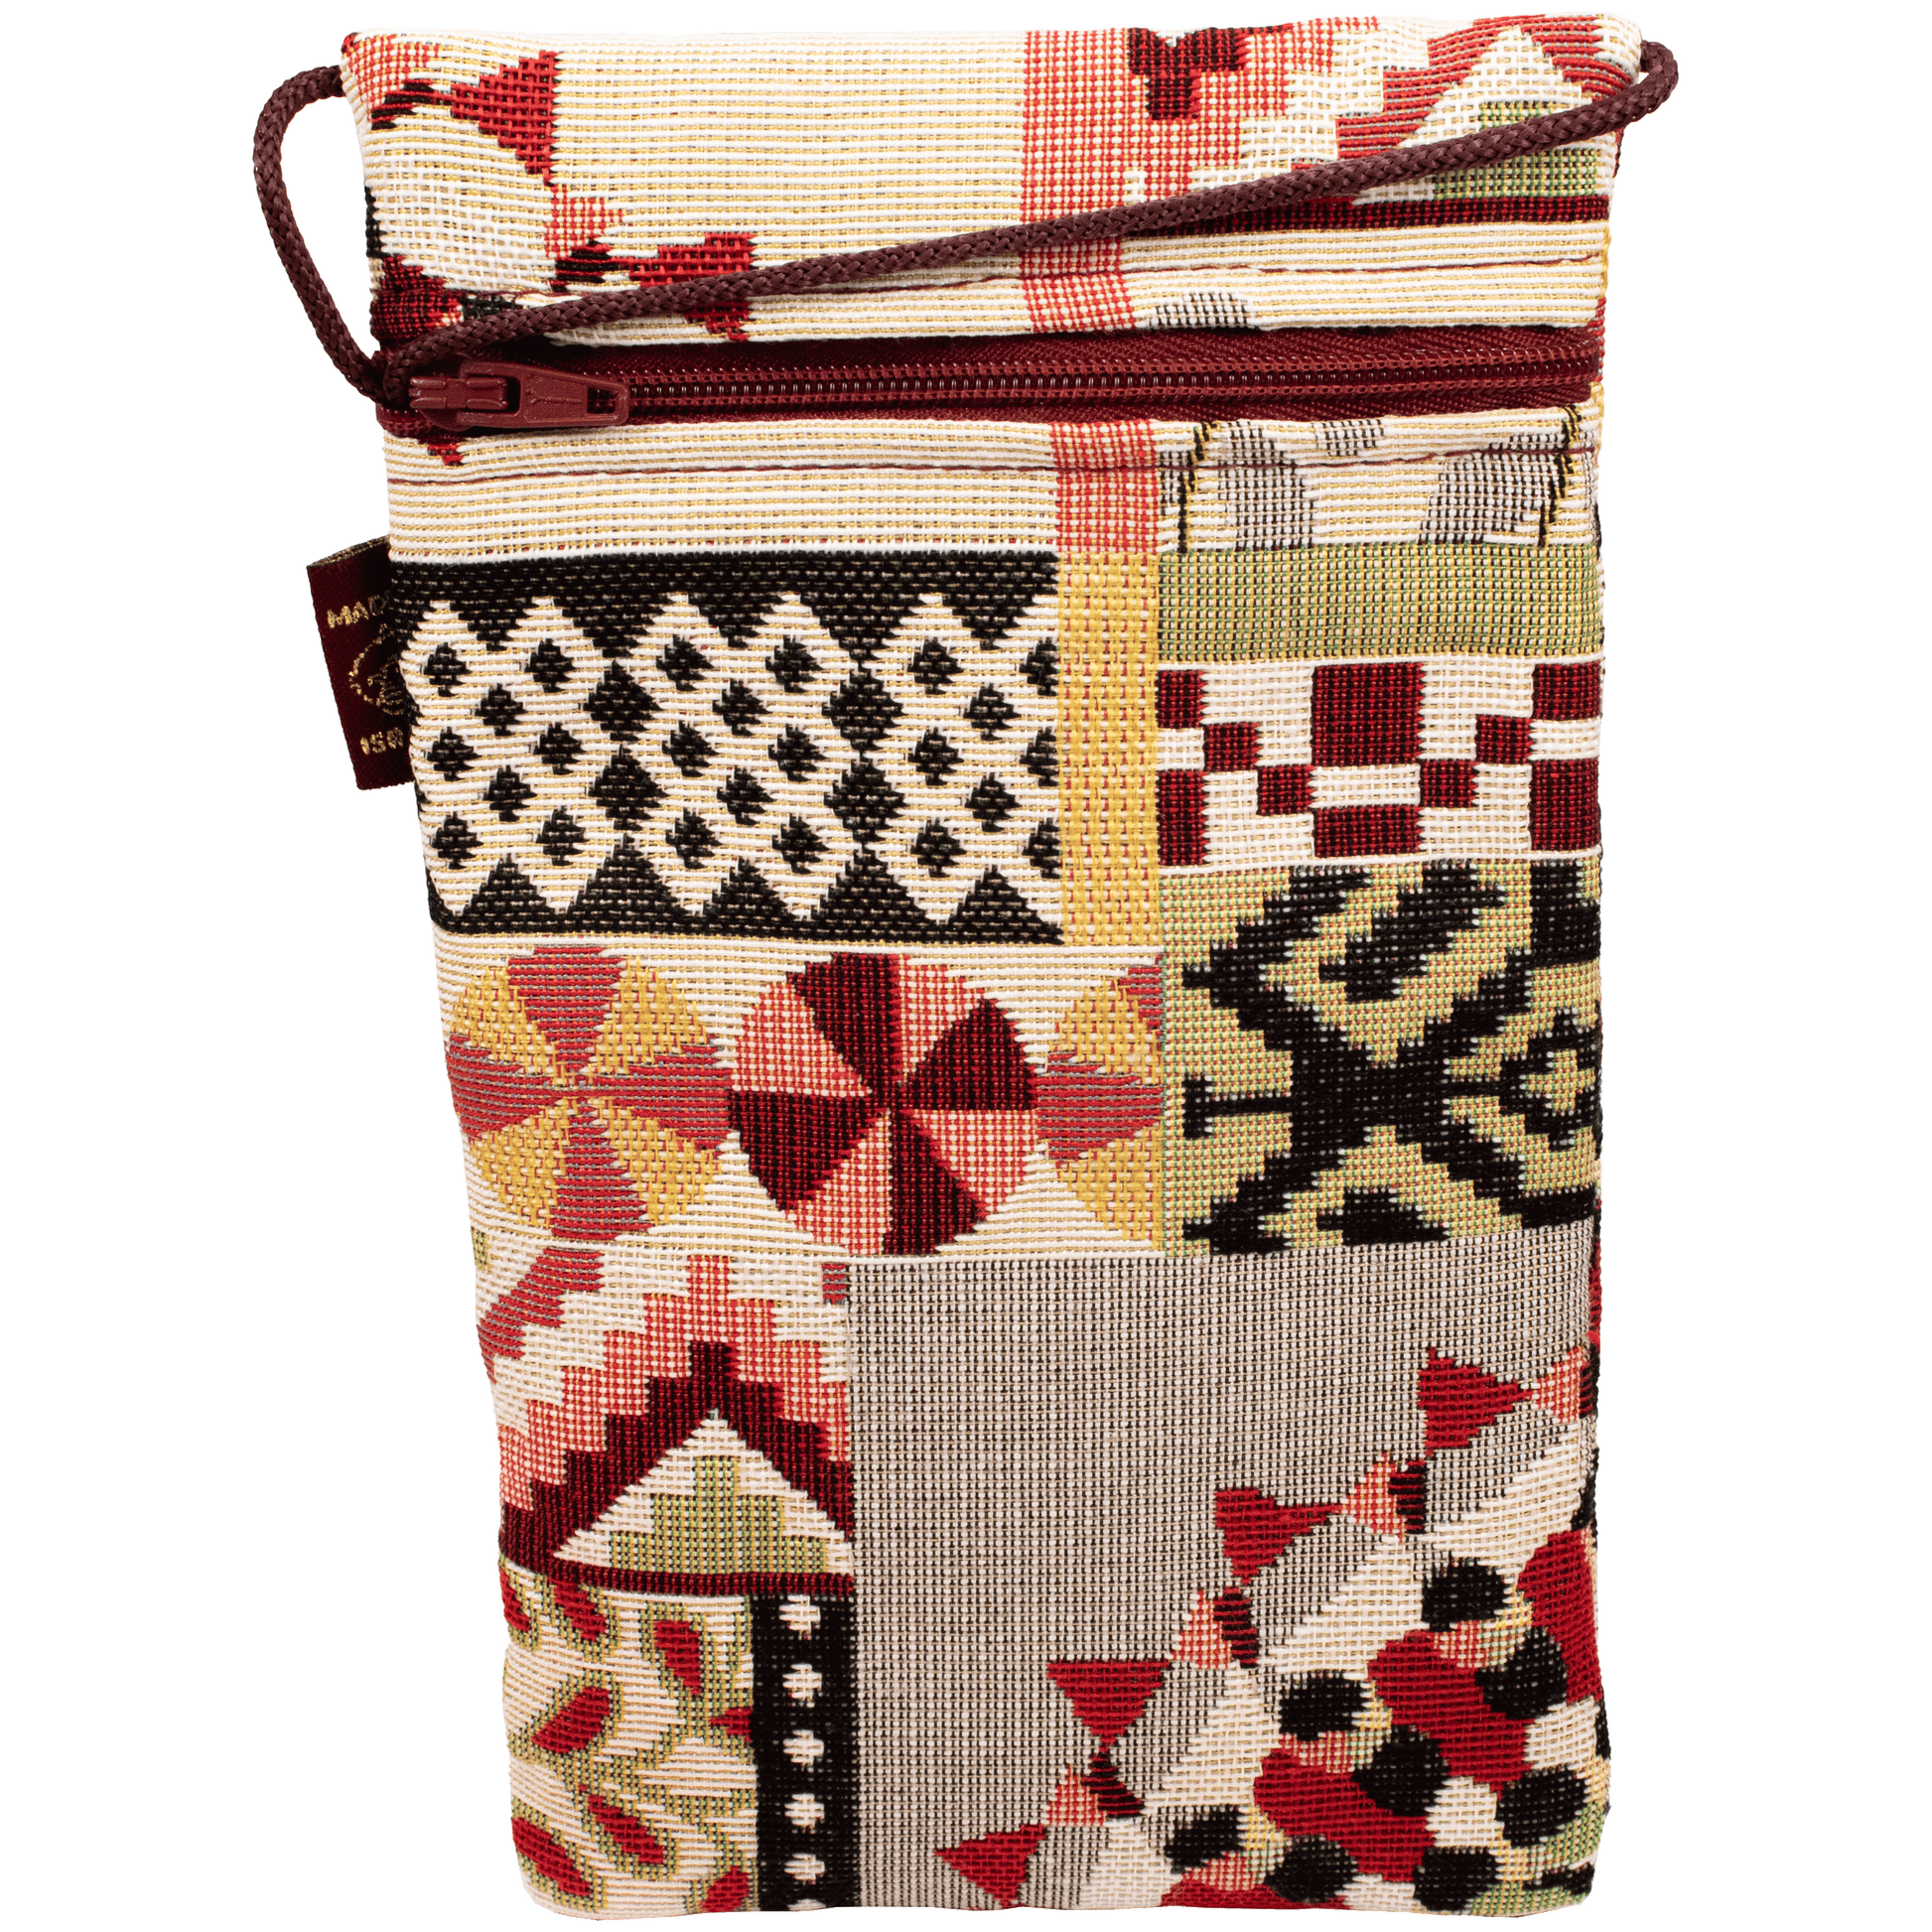 Slim rectangle purse with various patterns maroon black green and red colors